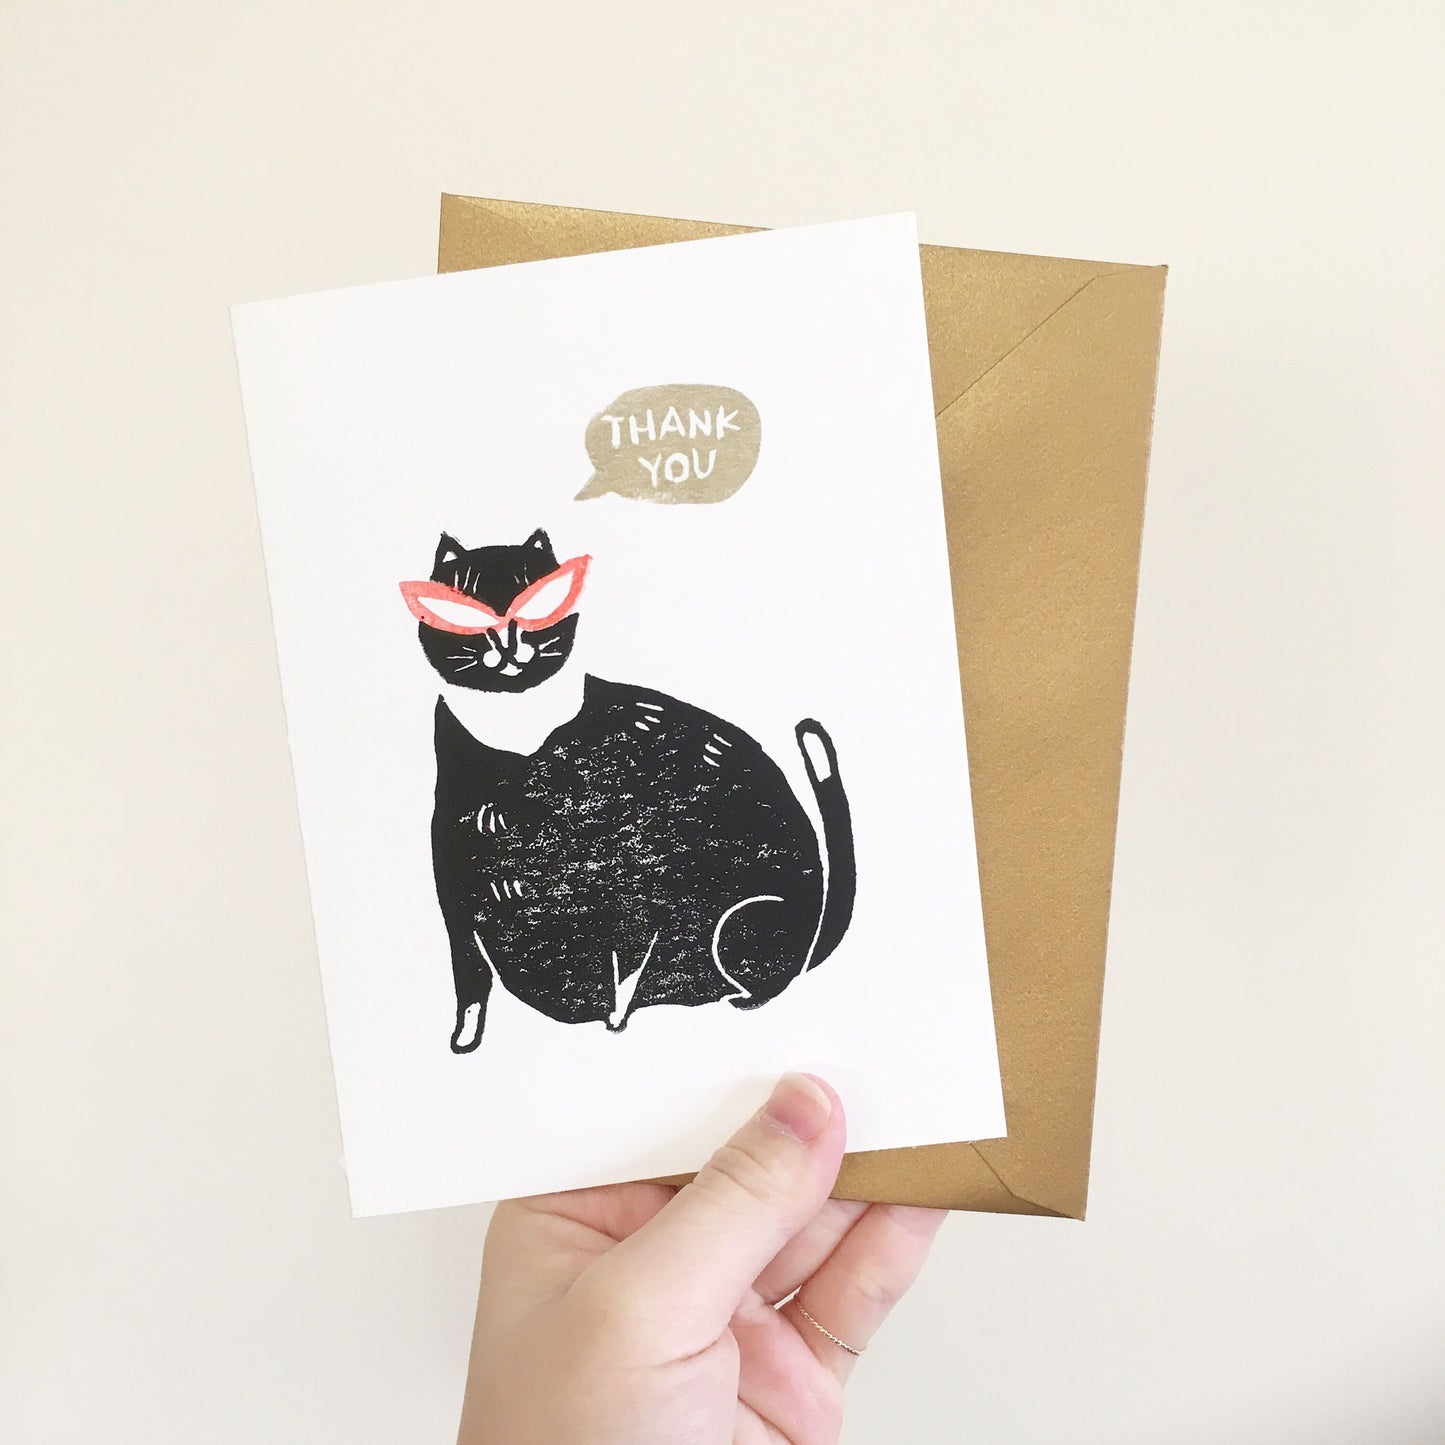 Ping Hatta: Thanks & Everyday Cards